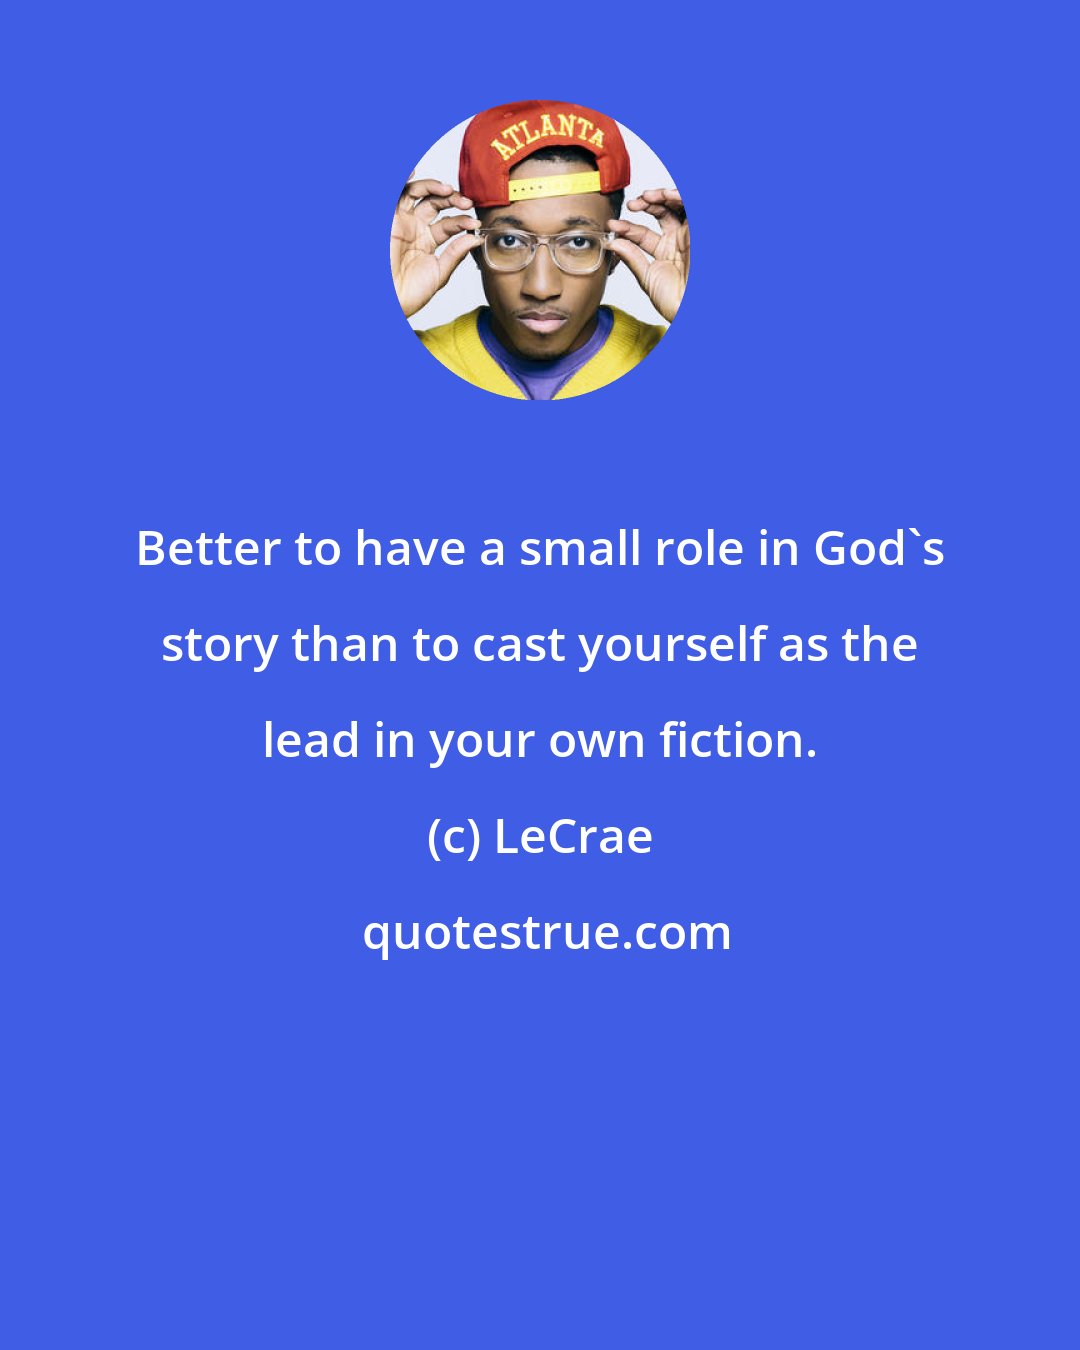 LeCrae: Better to have a small role in God's story than to cast yourself as the lead in your own fiction.